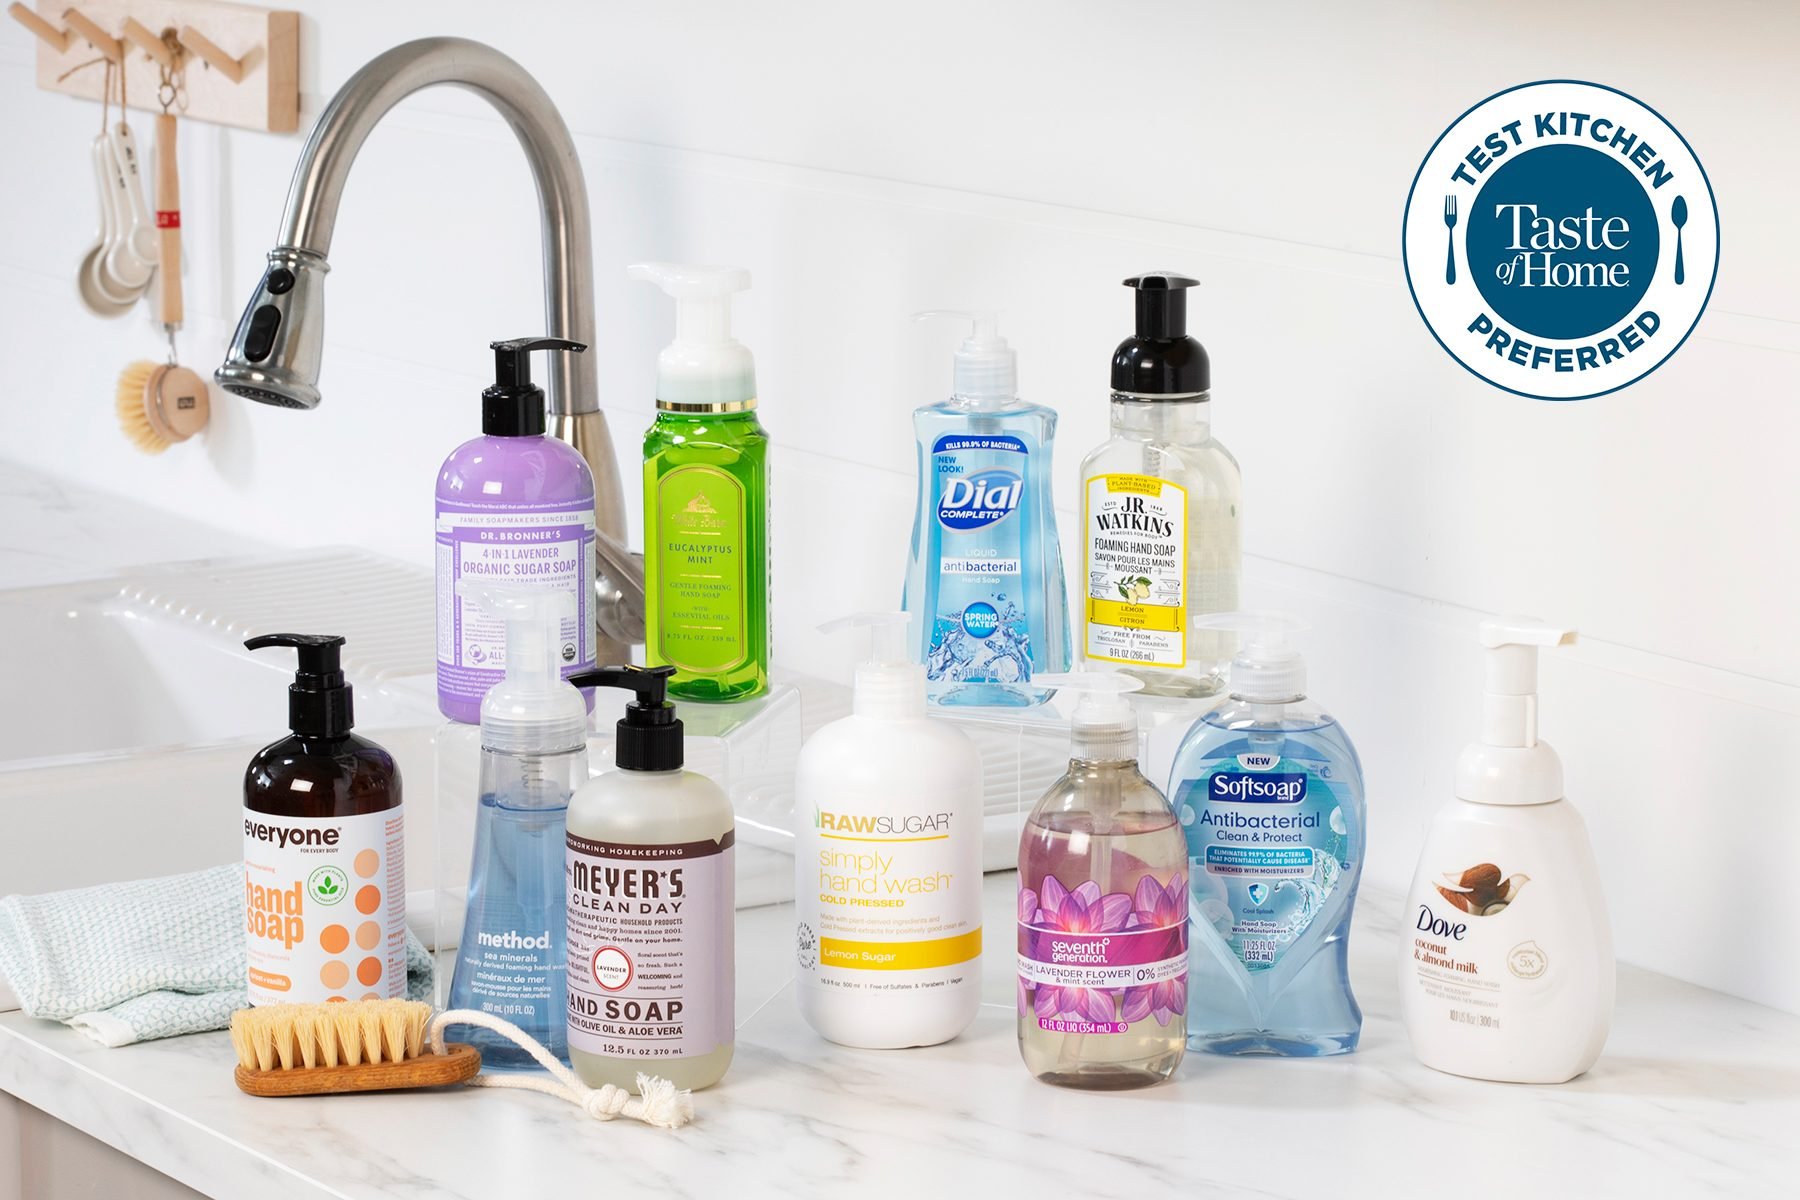 We Found the Best Hand Soap Options After Testing 11 Brands